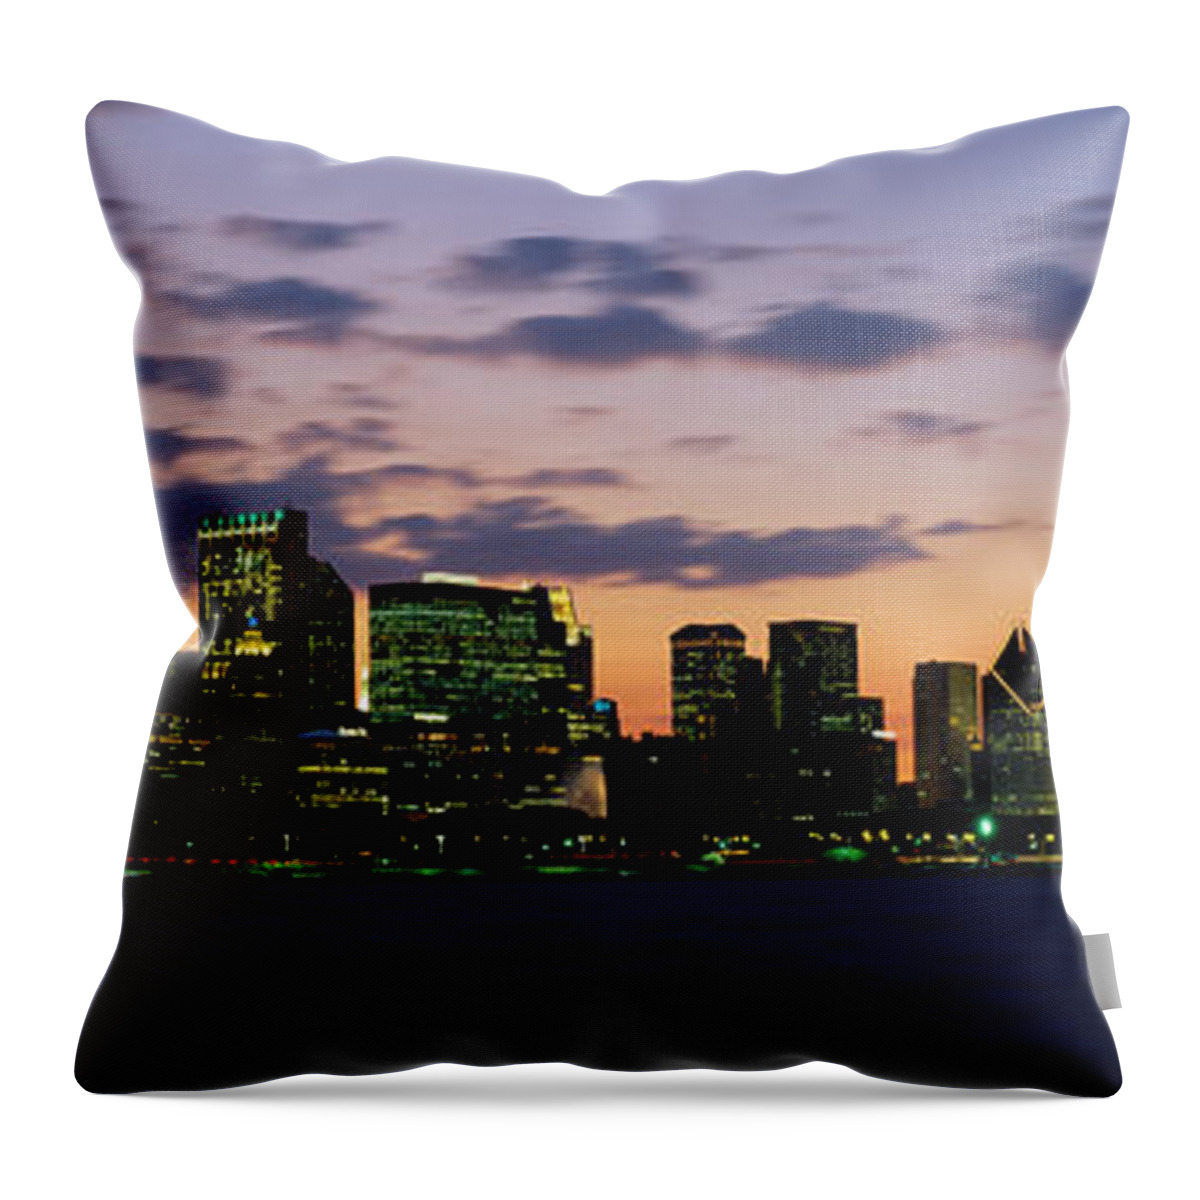 Photography Throw Pillow featuring the photograph Buildings In A City At Dusk, Chicago #1 by Panoramic Images